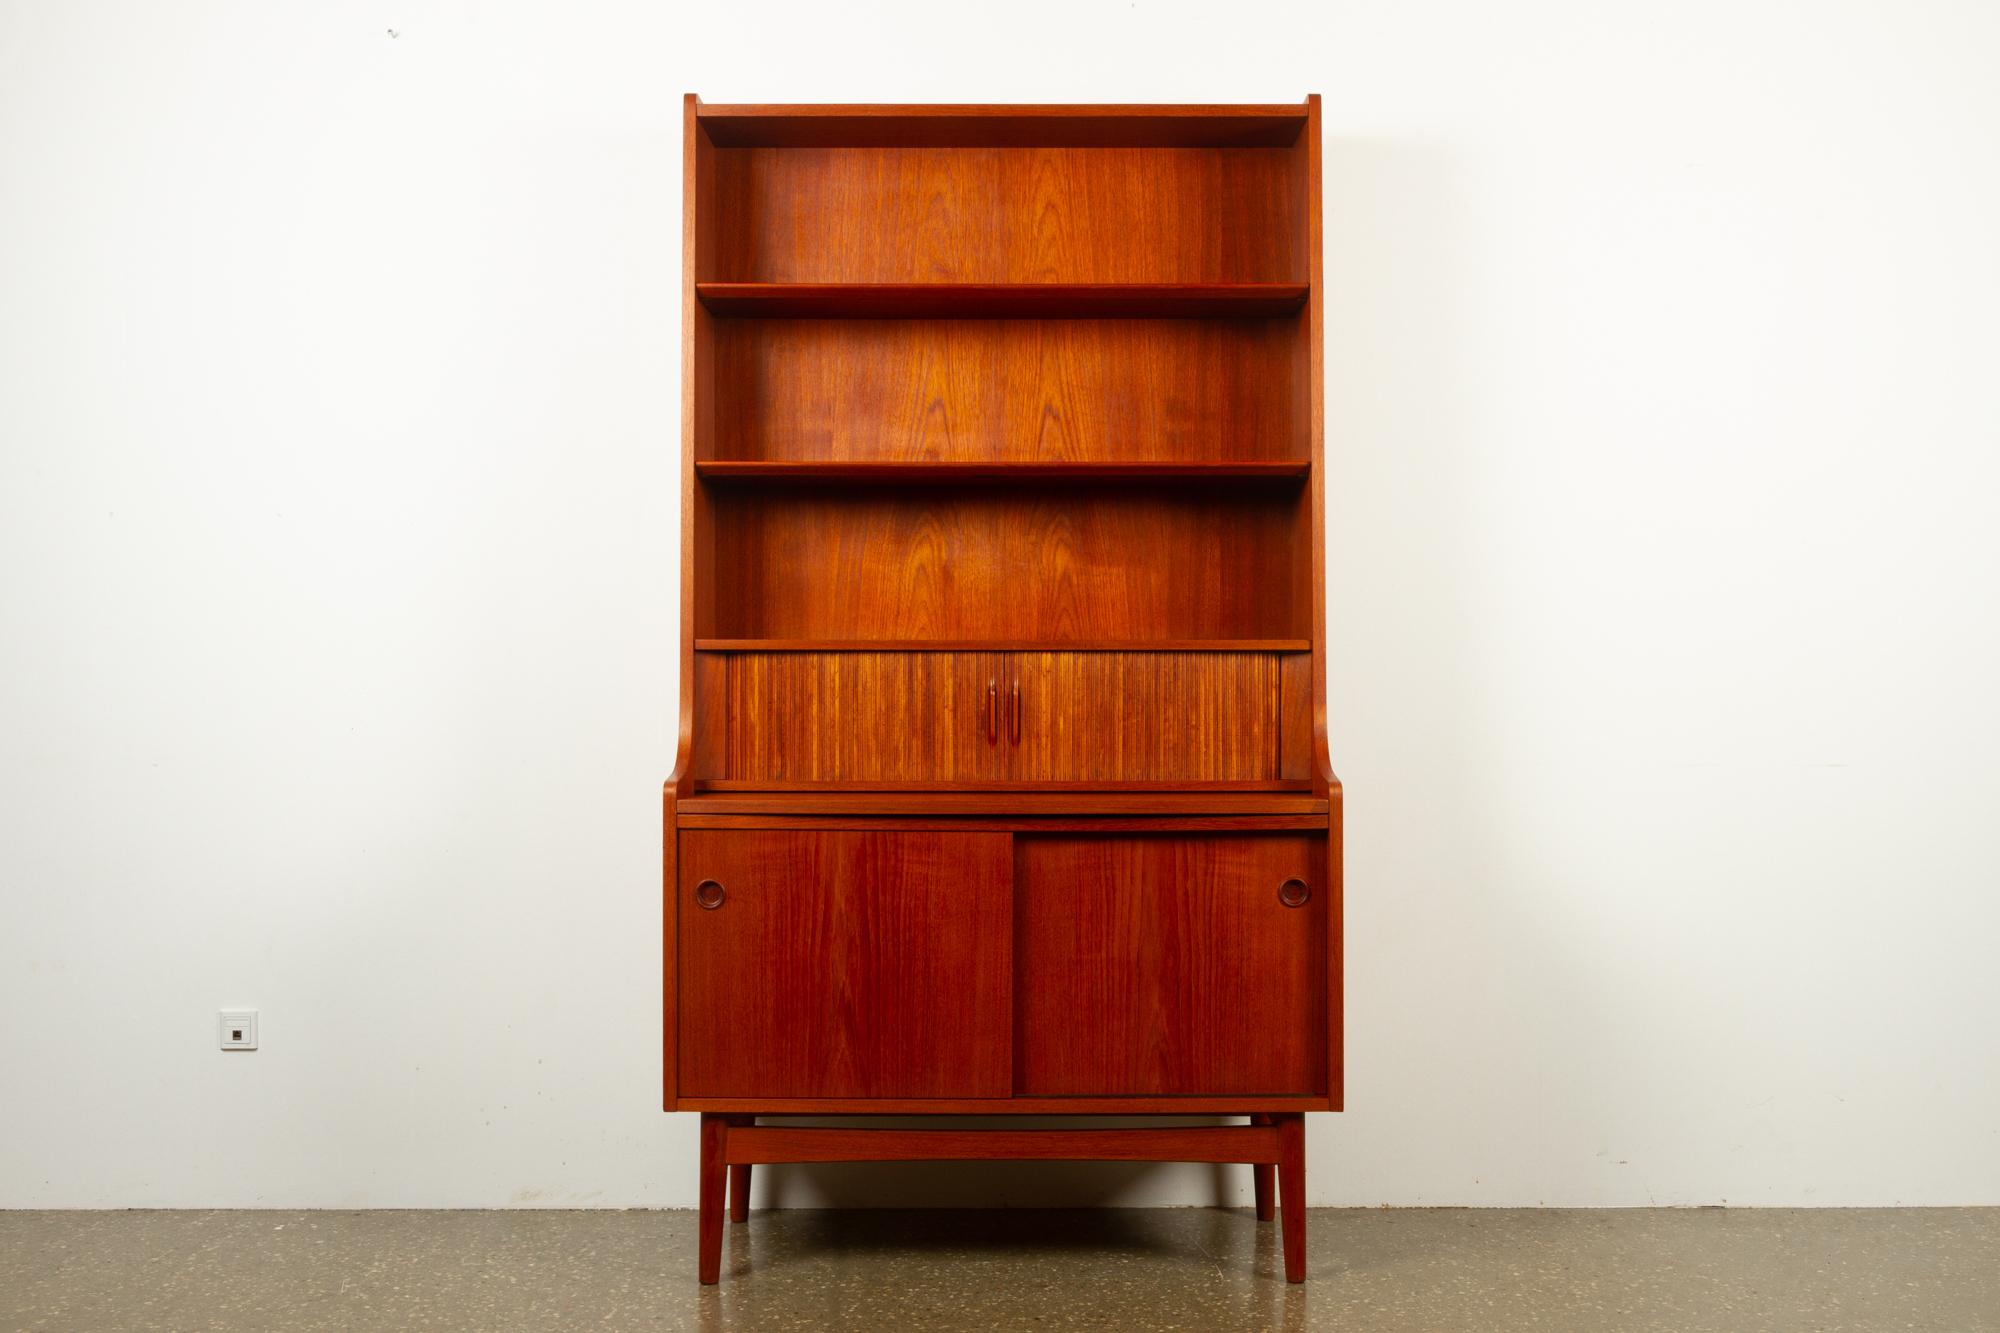 Vintage Danish teak bookcase by Johannes Sorth for Nexø Møbelfabrik, Bornholm, Denmark. Date of production Dec 9th 1964.
Very versatile tall book case with shelves, cabinet and drawers, also functions as a secretaire as the large shelf under the